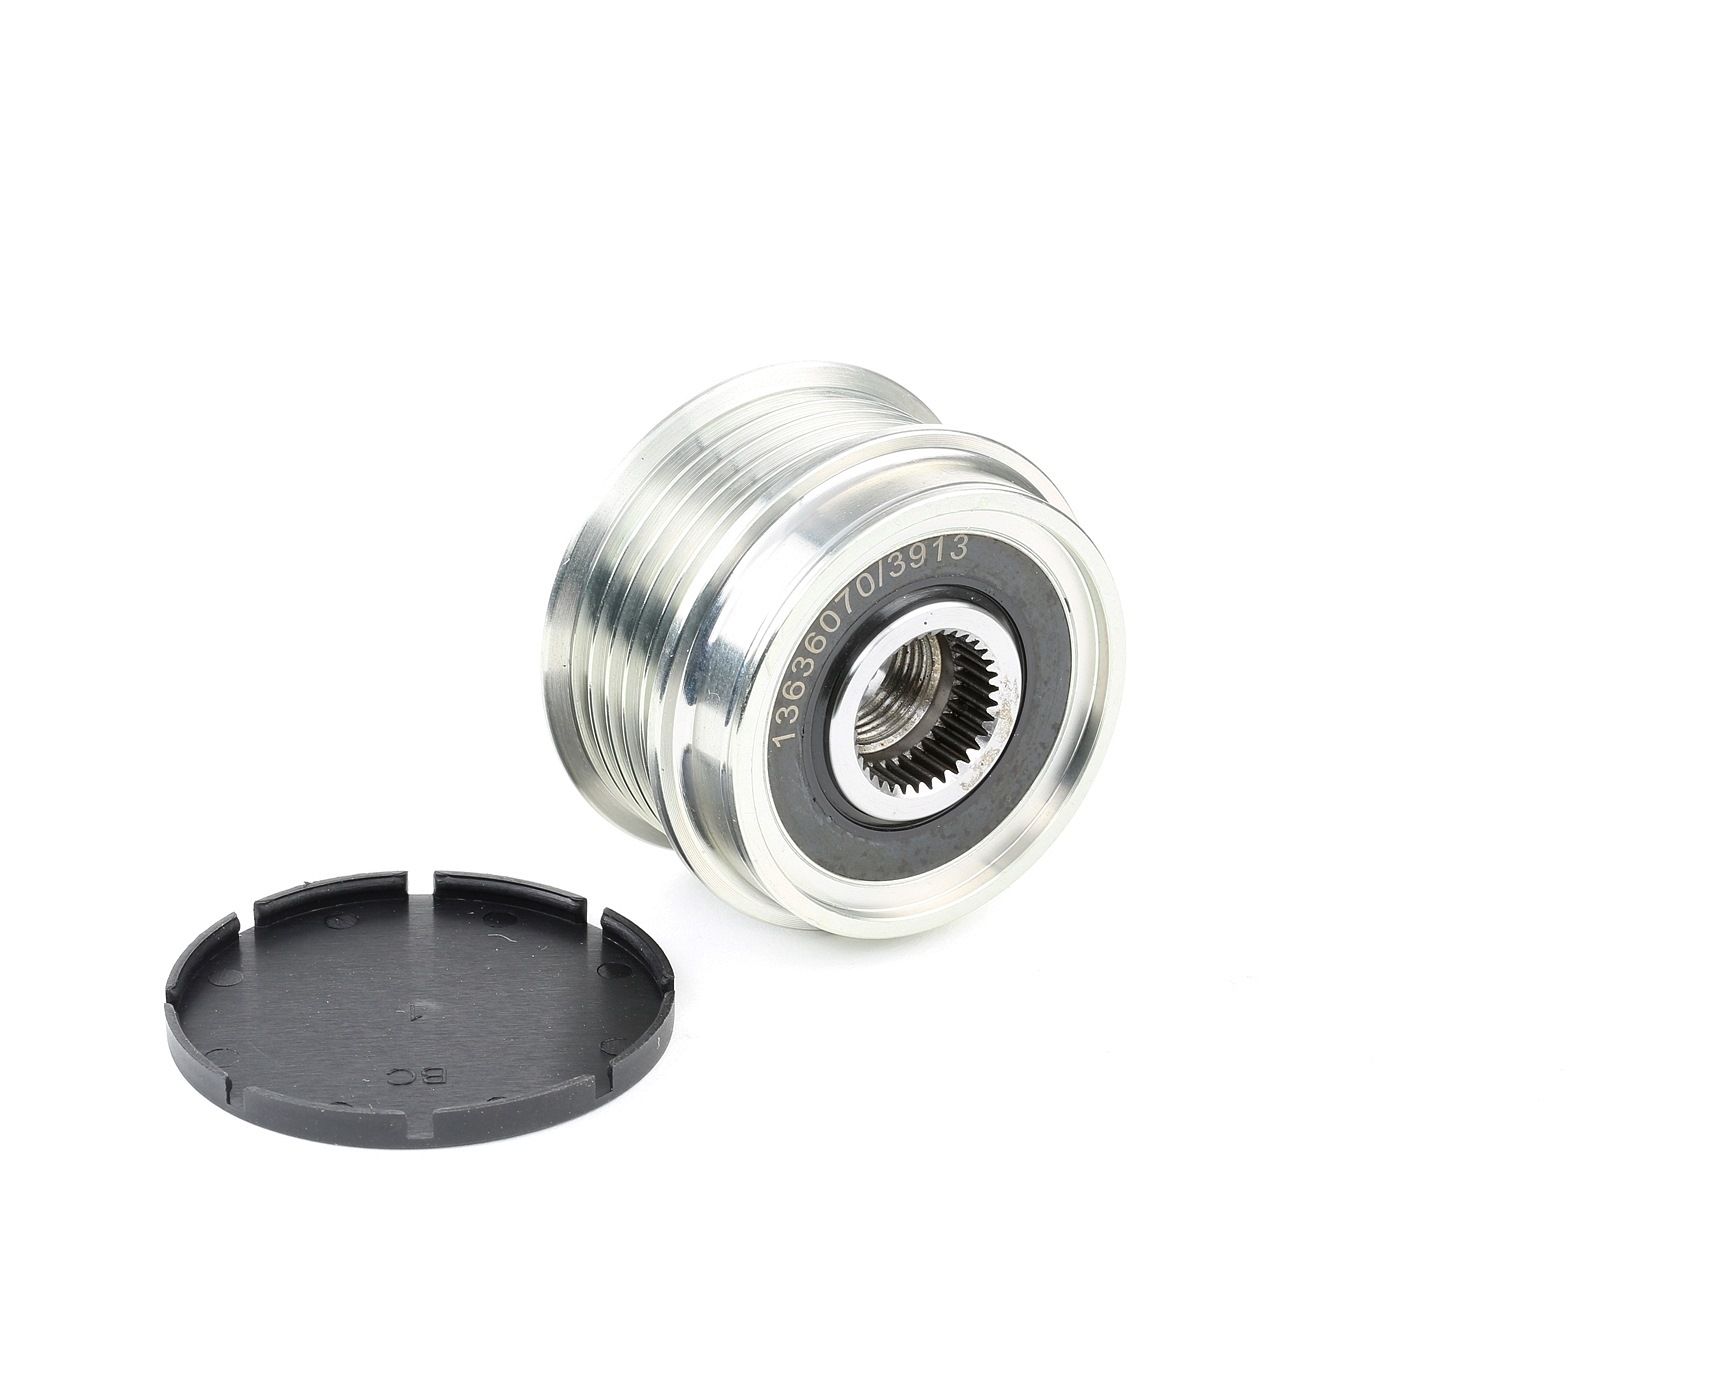 RIDEX 1390F0050 Alternator Freewheel Clutch Width: 35mm, Requires special tools for mounting